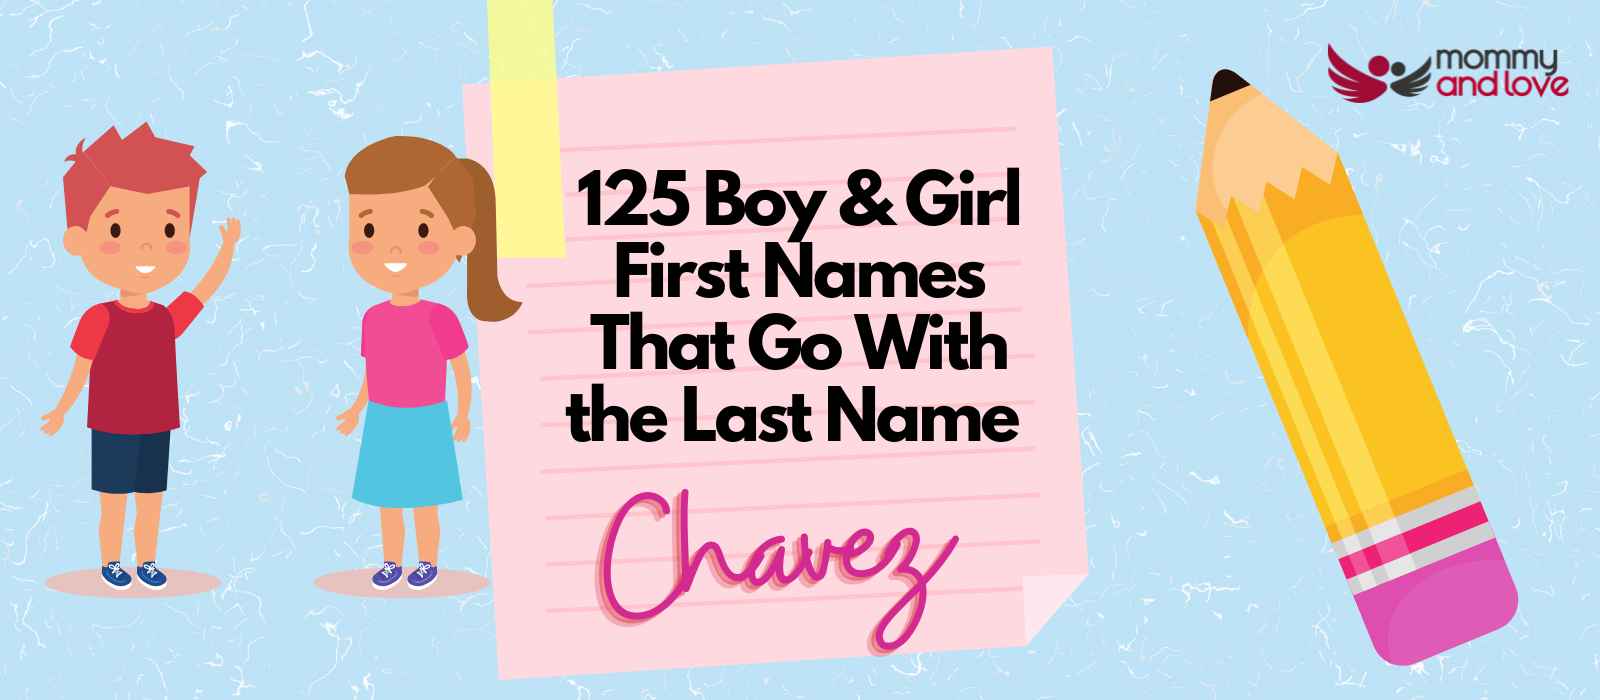 125 Boy & Girl First Names That Go With the Last Name Chavez